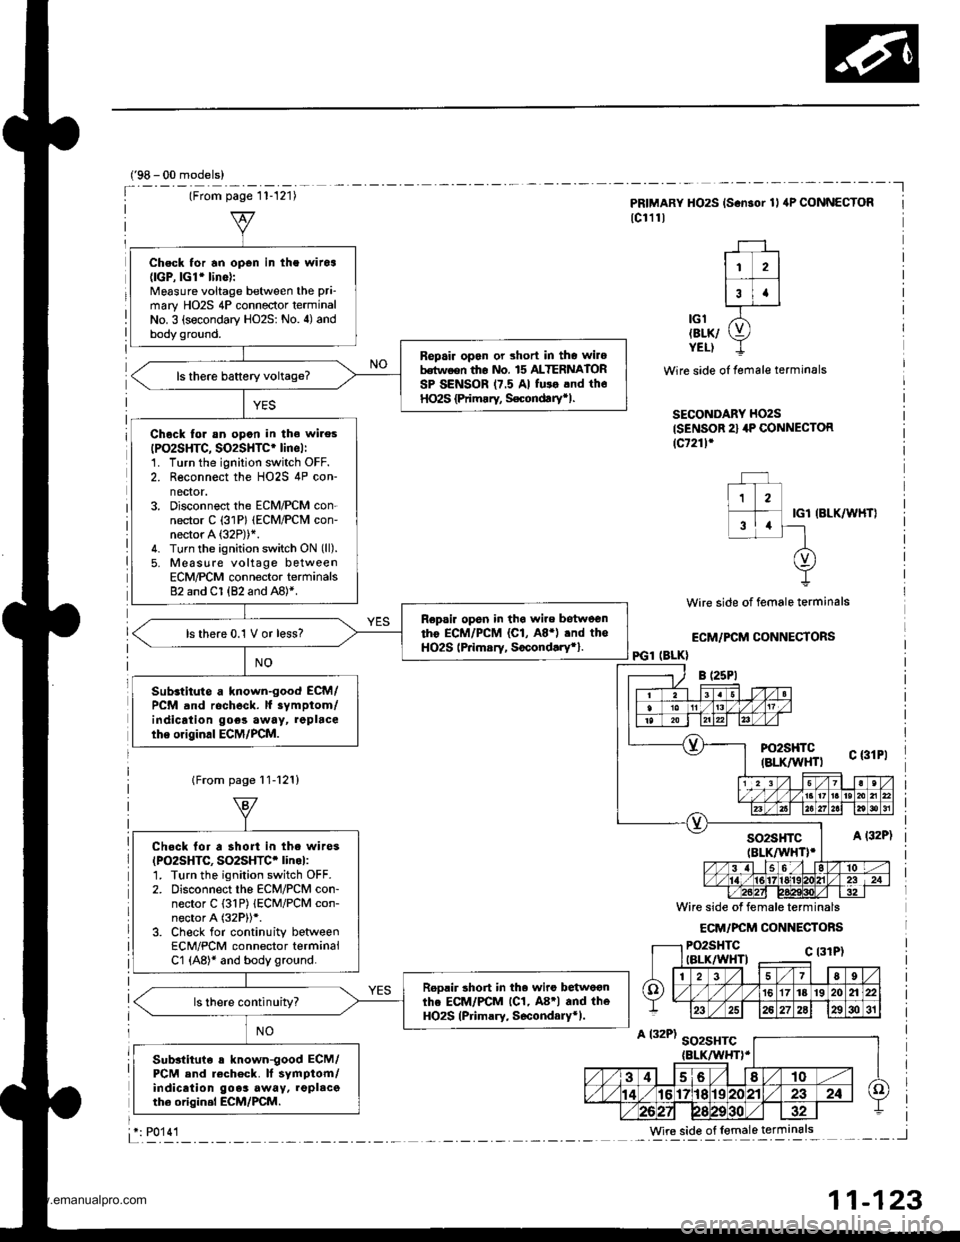 HONDA CR-V 1999 RD1-RD3 / 1.G Service Manual 
Check for an open in the witoa(lGP,lGllino):
Mgasure voitage between the pri-
mary HO2S 4P connector terminalNo. 3 (secondary HO2S: No. 4) andbody ground.
Bepair opan or short in tho wilobdtween th6